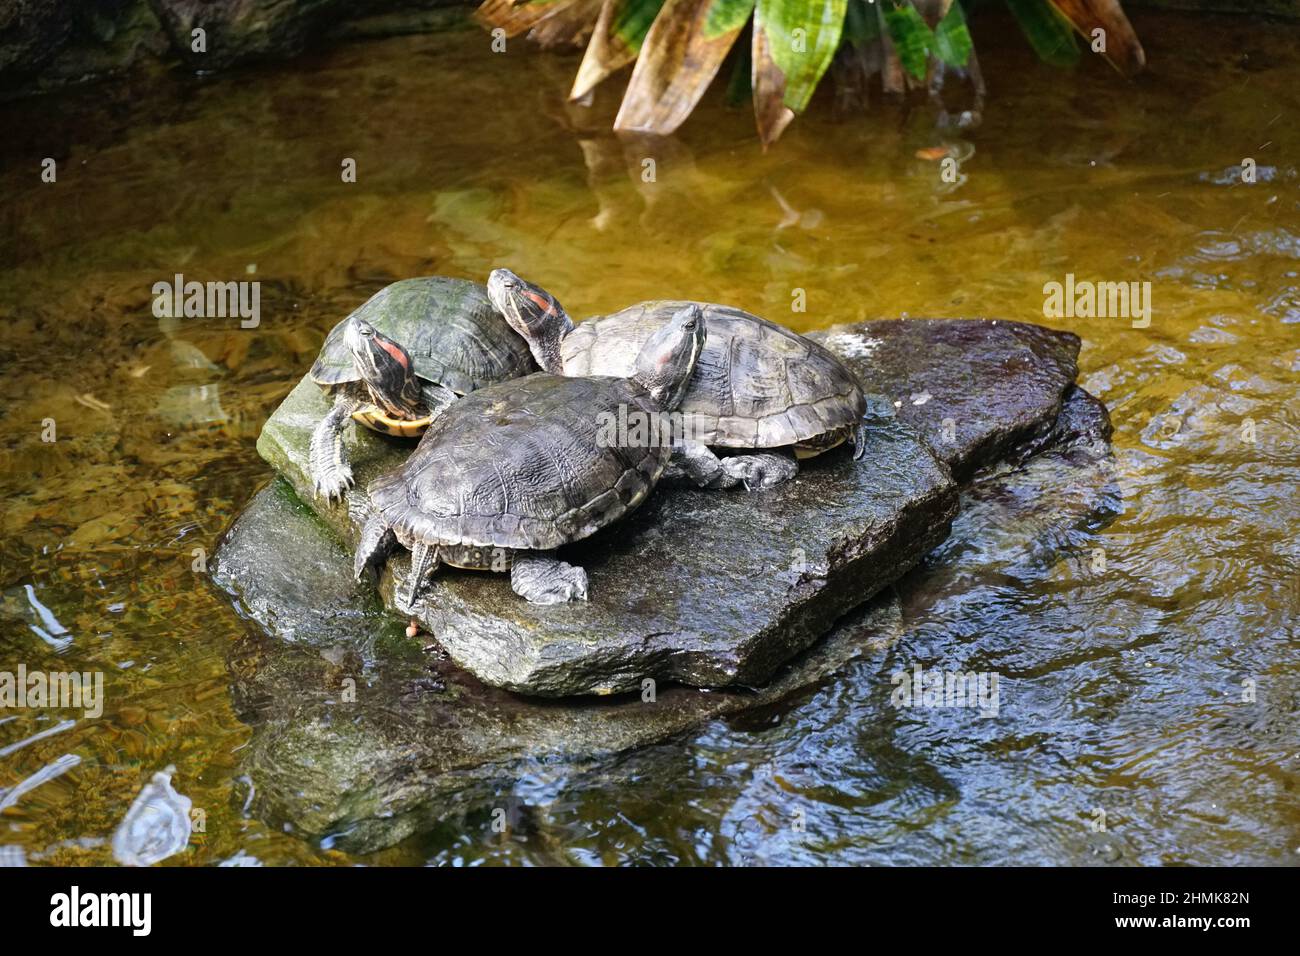 Turtles on a Rock in a Pond Stock Photo